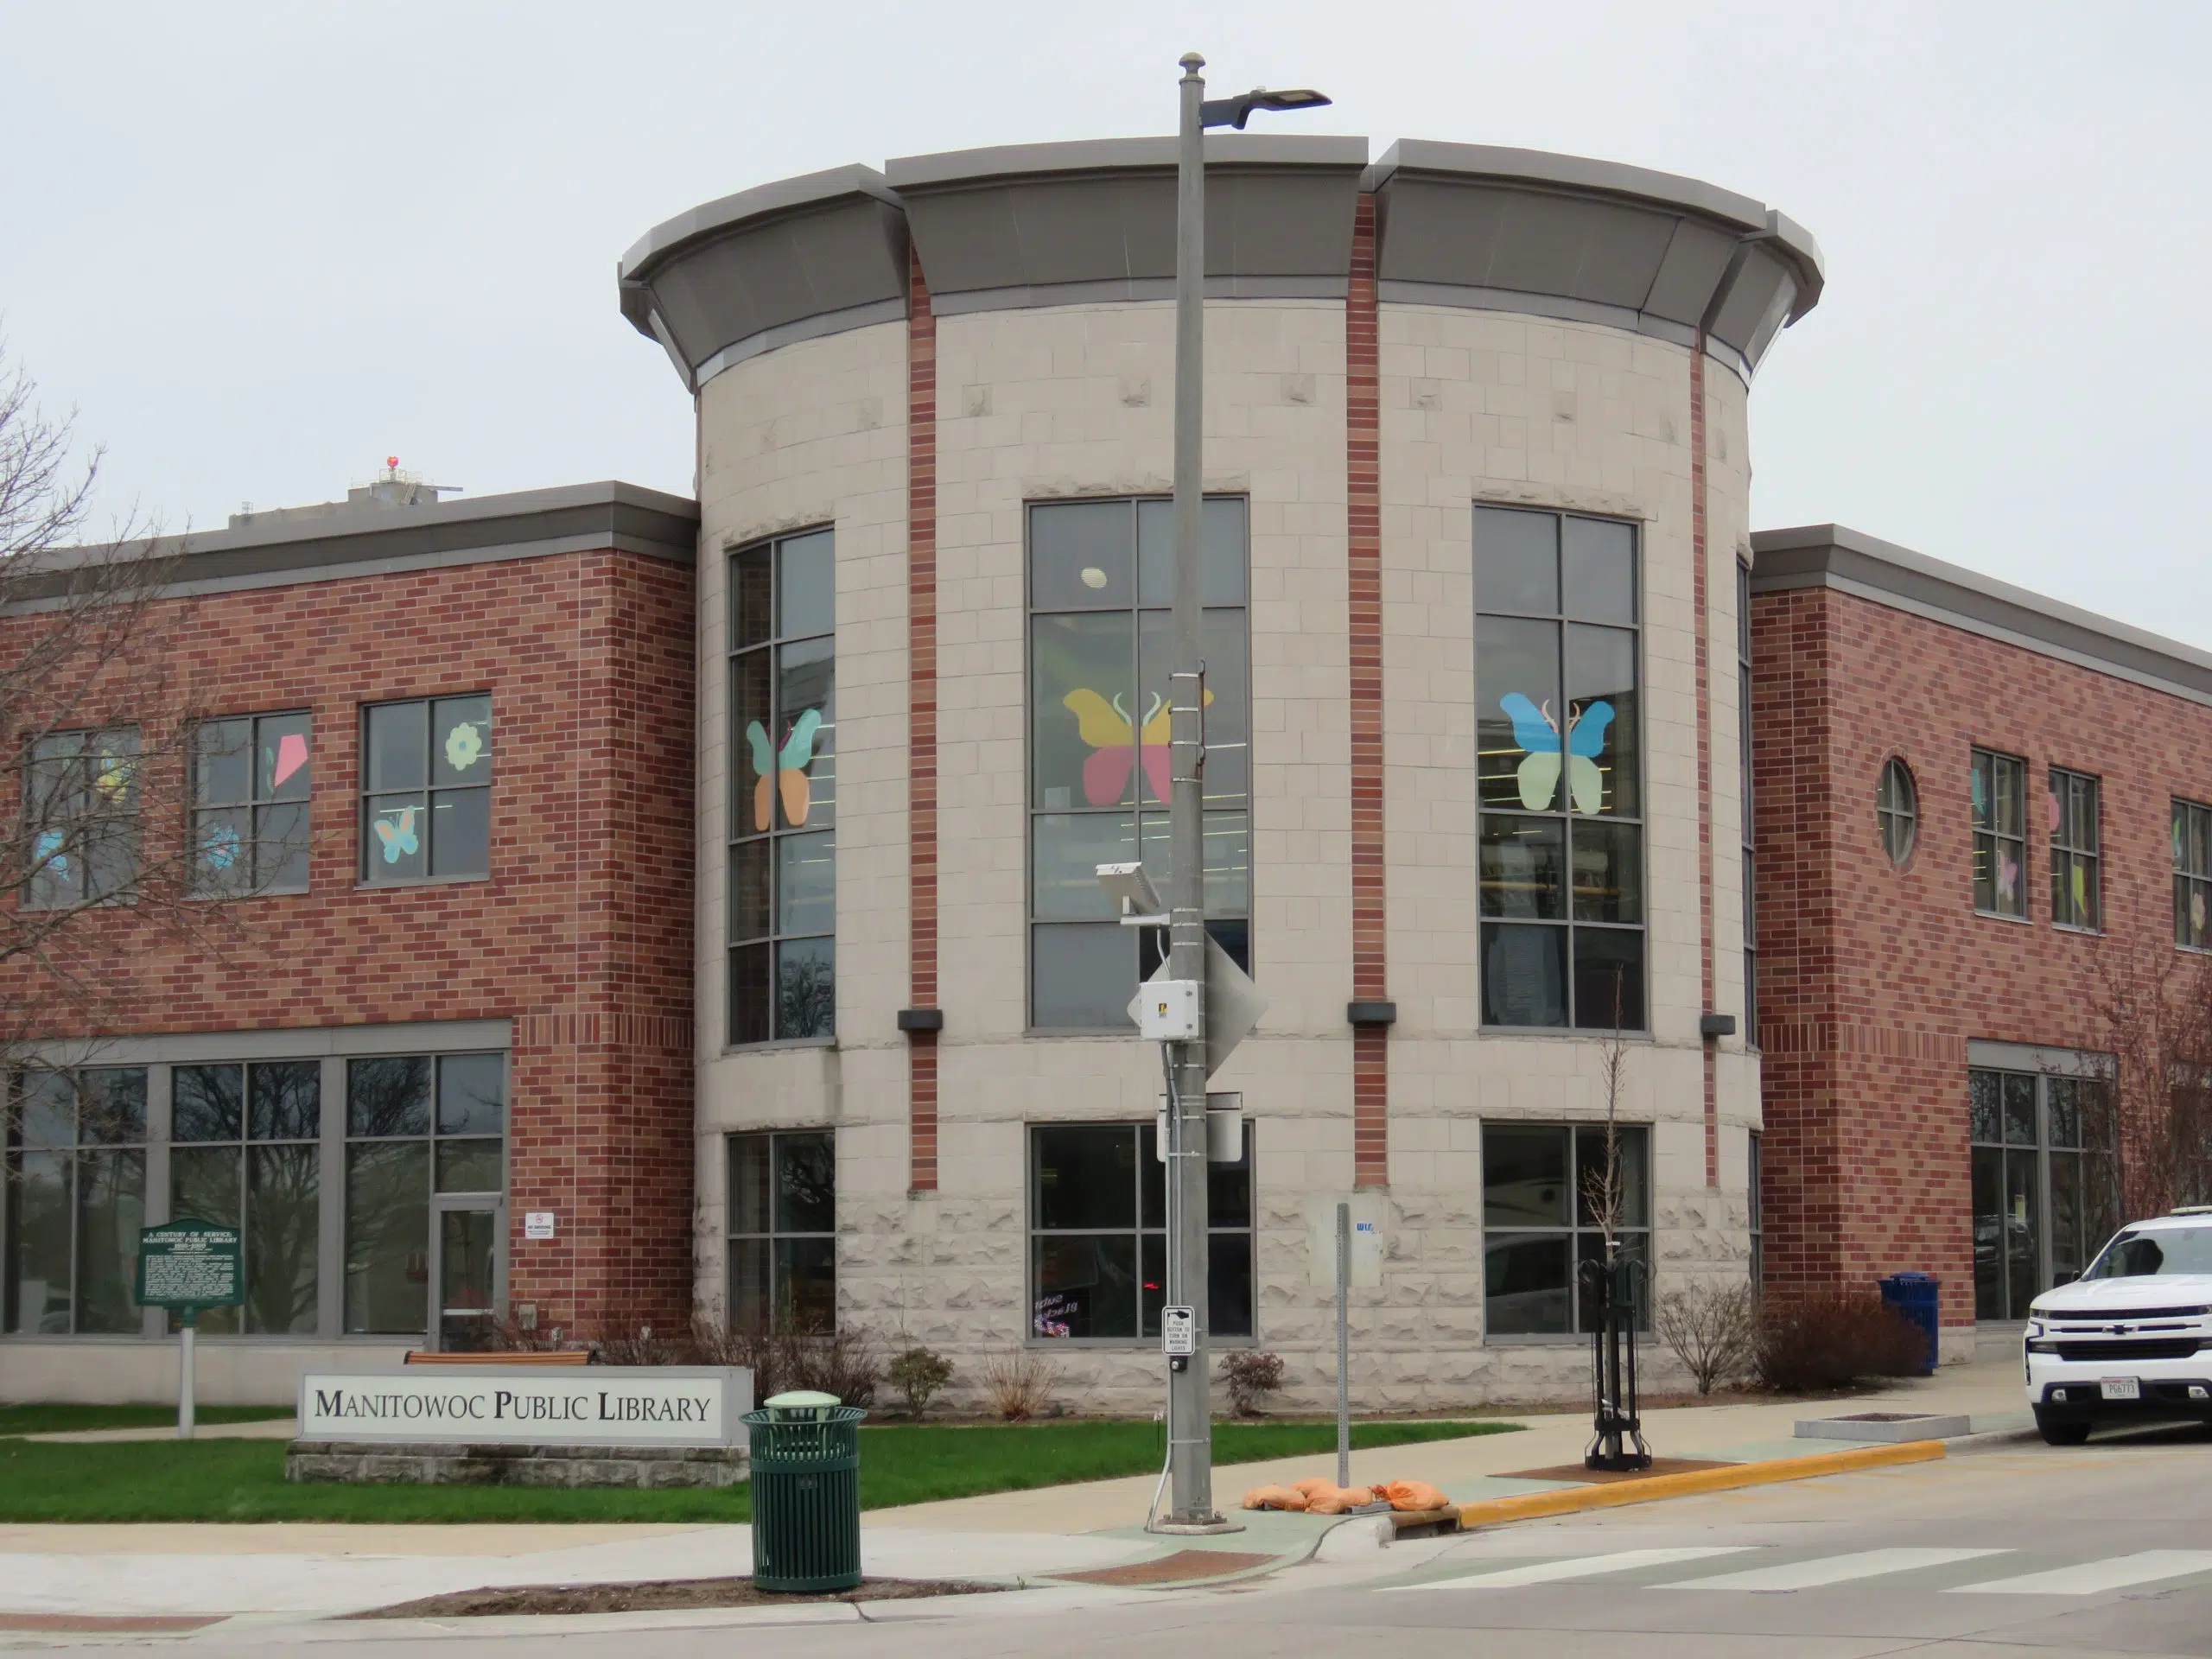 Expanded Hours Take Effect Today at Manitowoc Public Library